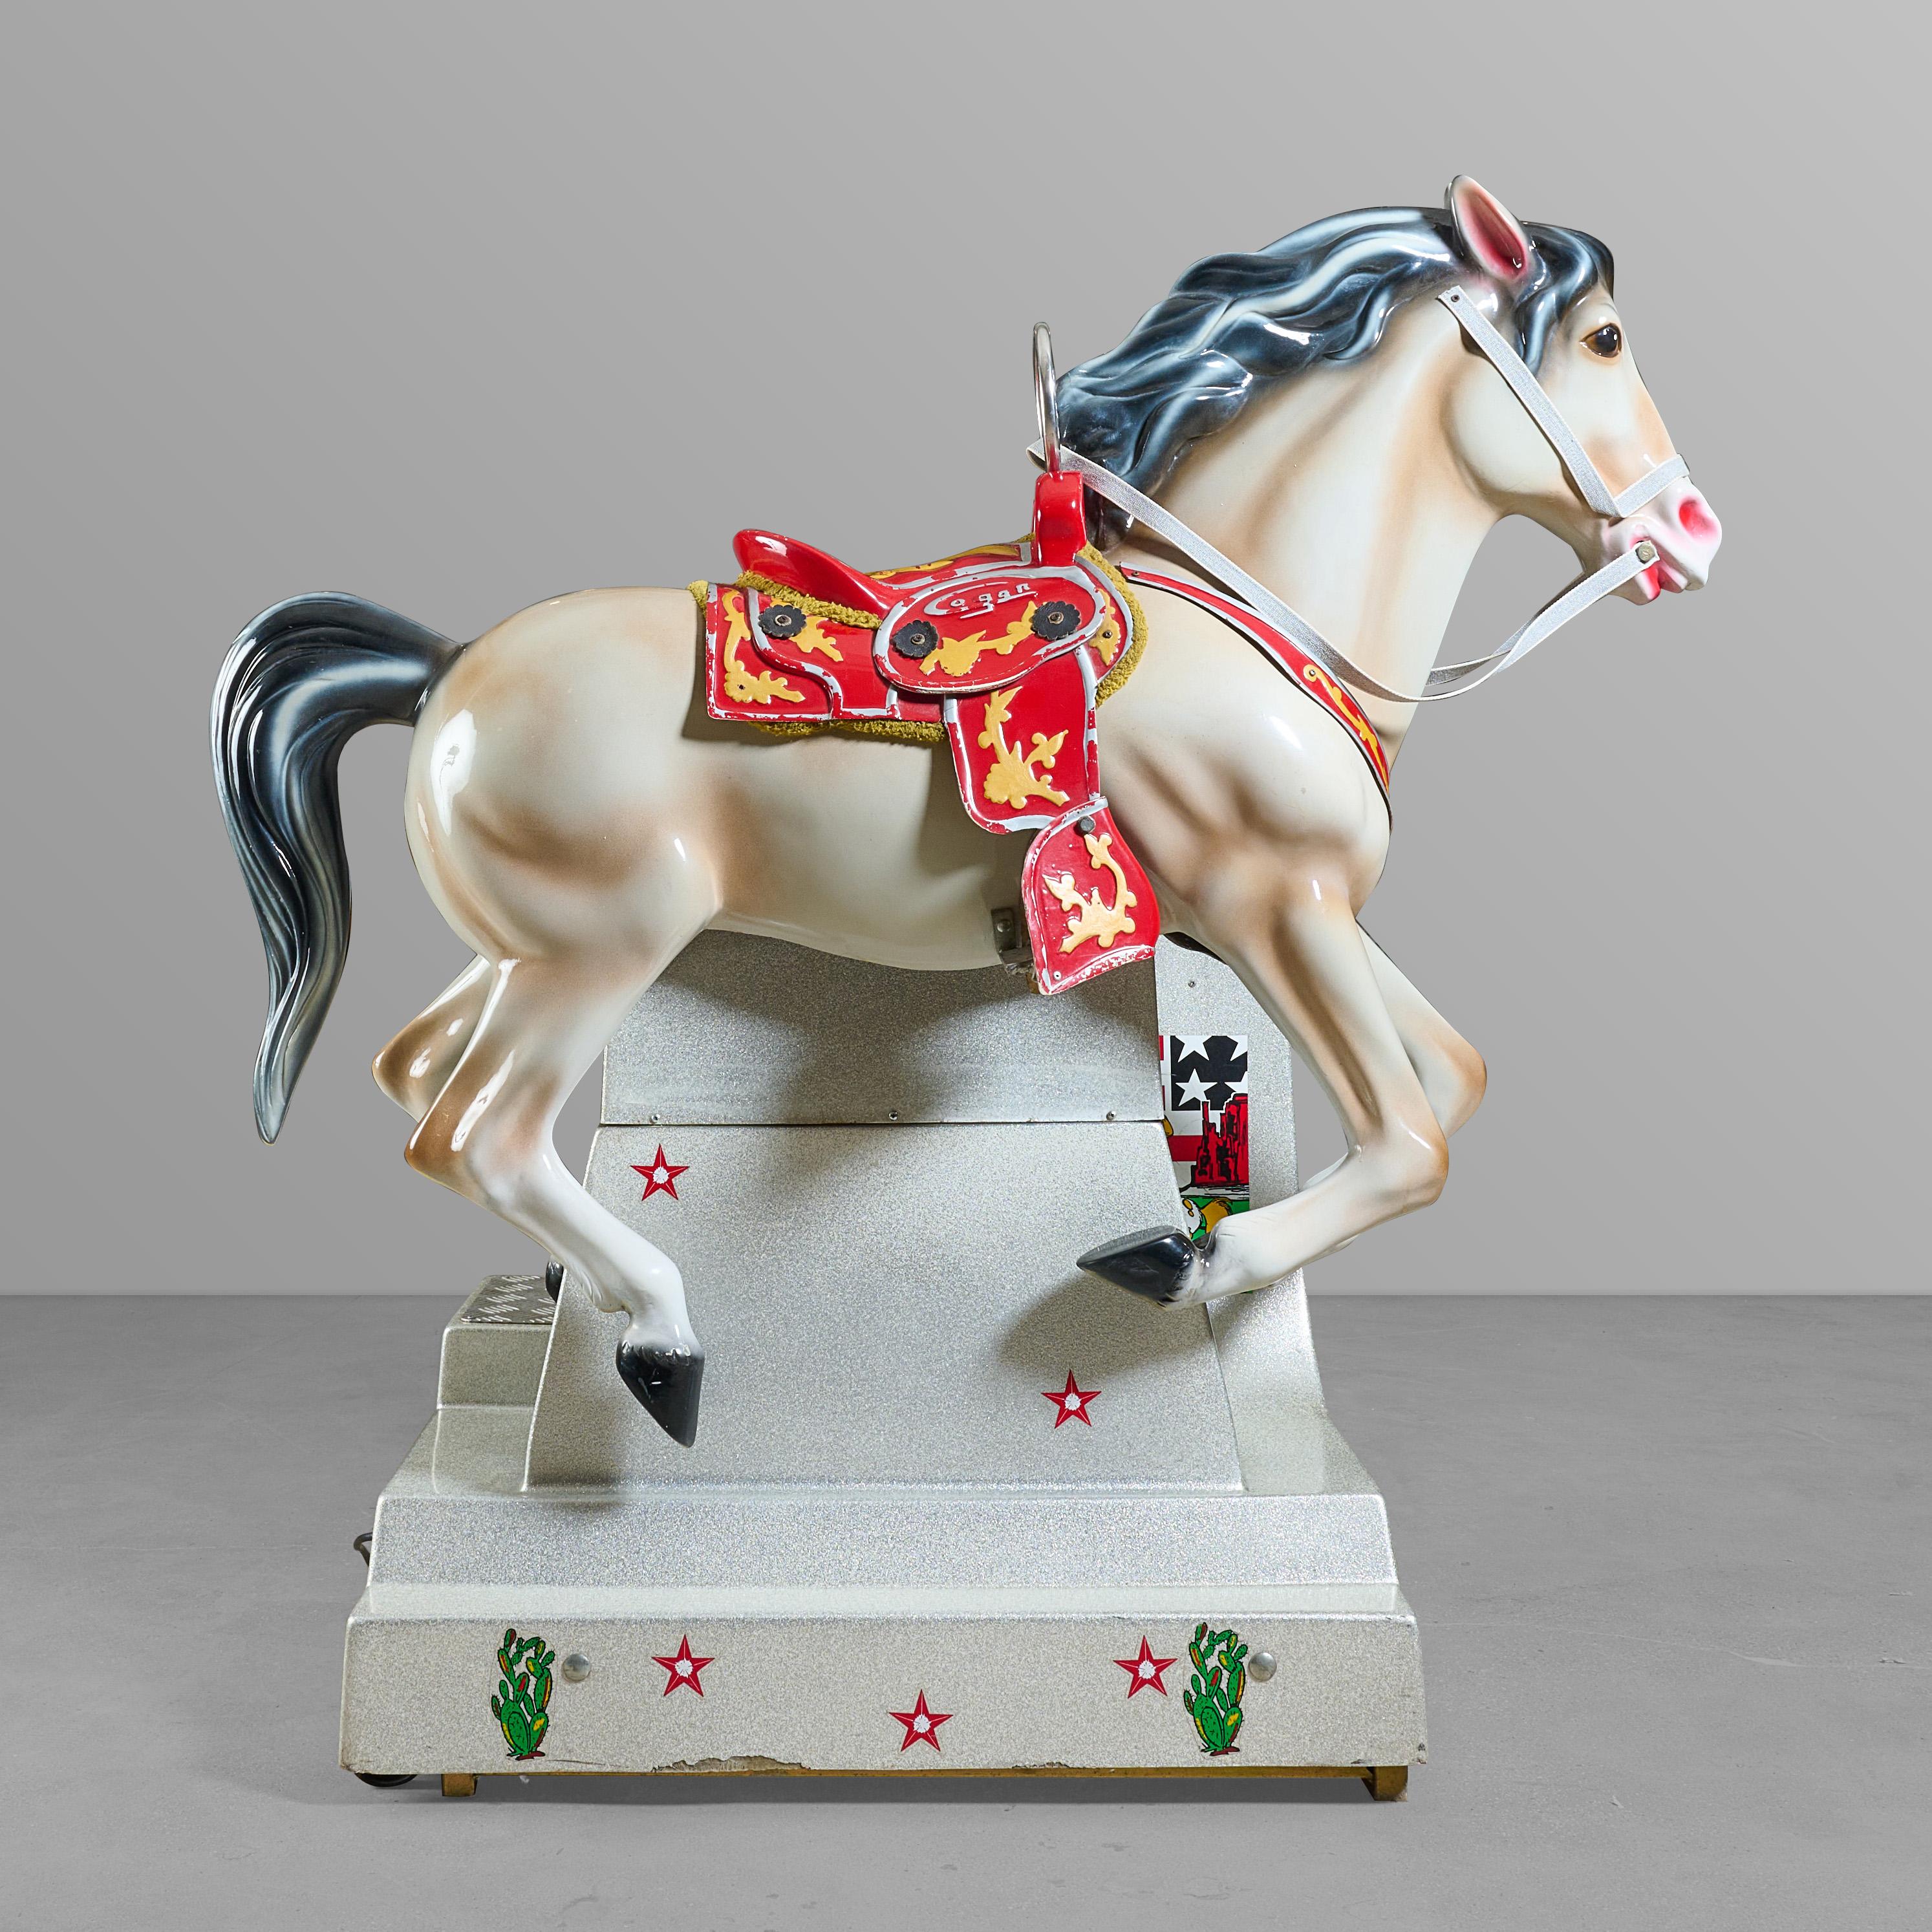 Mid-century coin operated horse ride for kids (of all ages).

